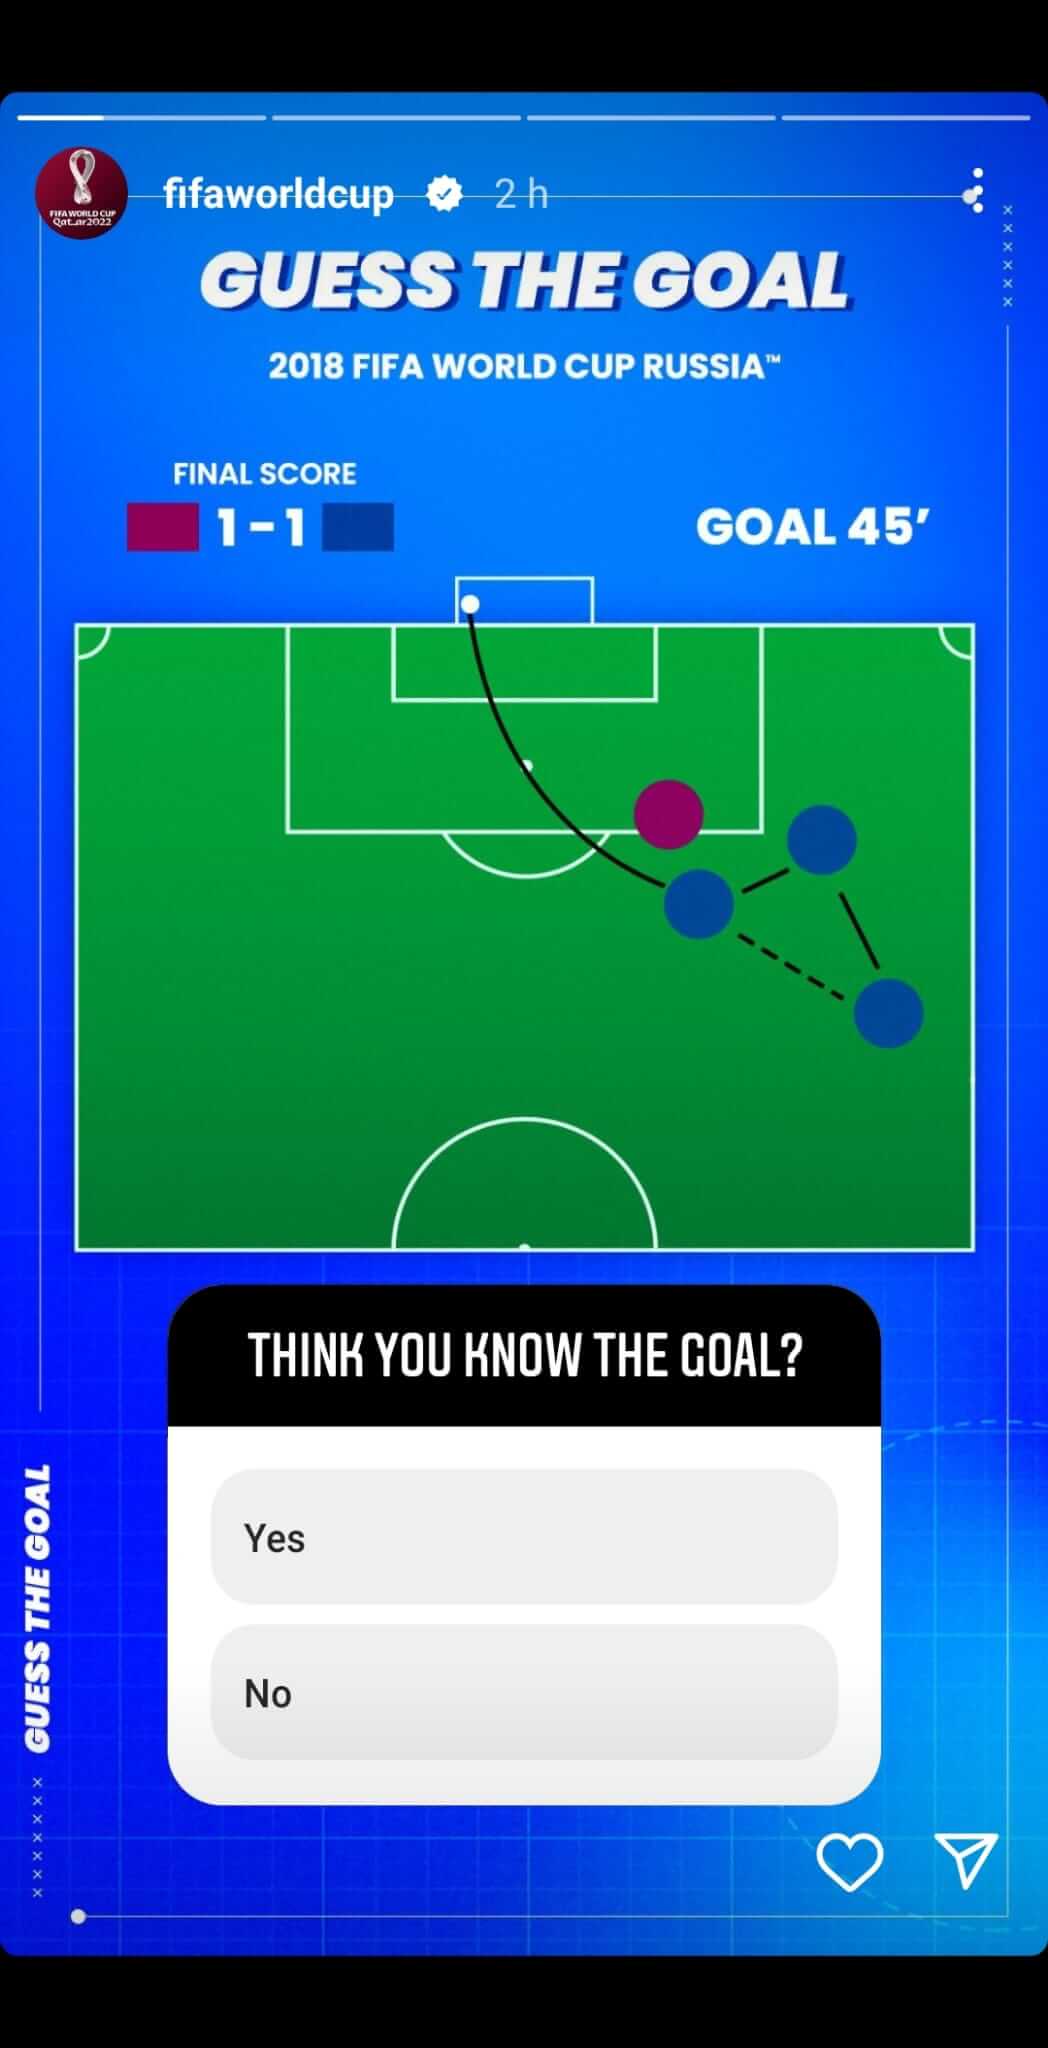 how-to-create-content-strategy-on-instagram-metrics-fifaworldcup-example-3.